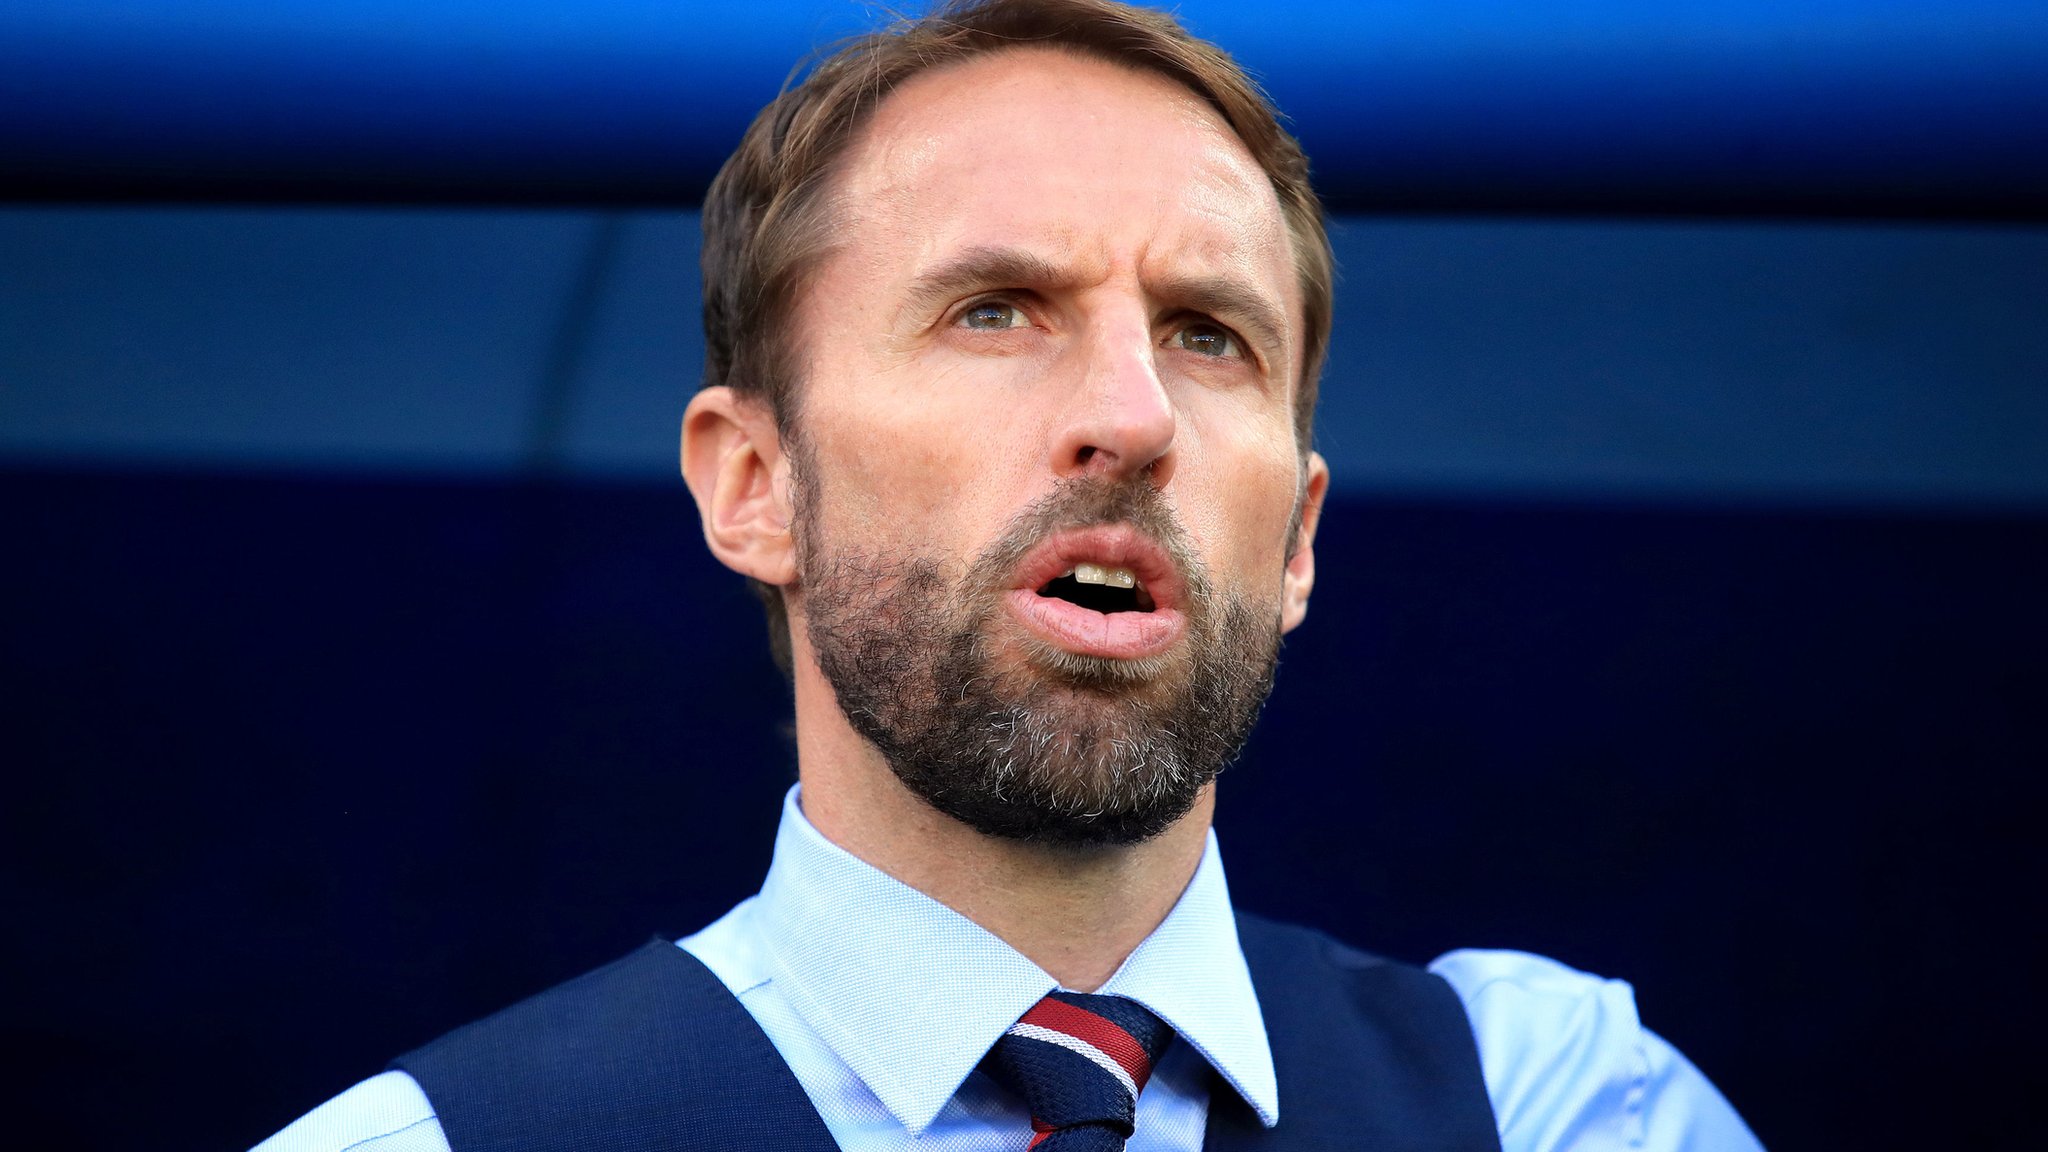 Colombia game is England's biggest knockout tie for a decade, says Southgate